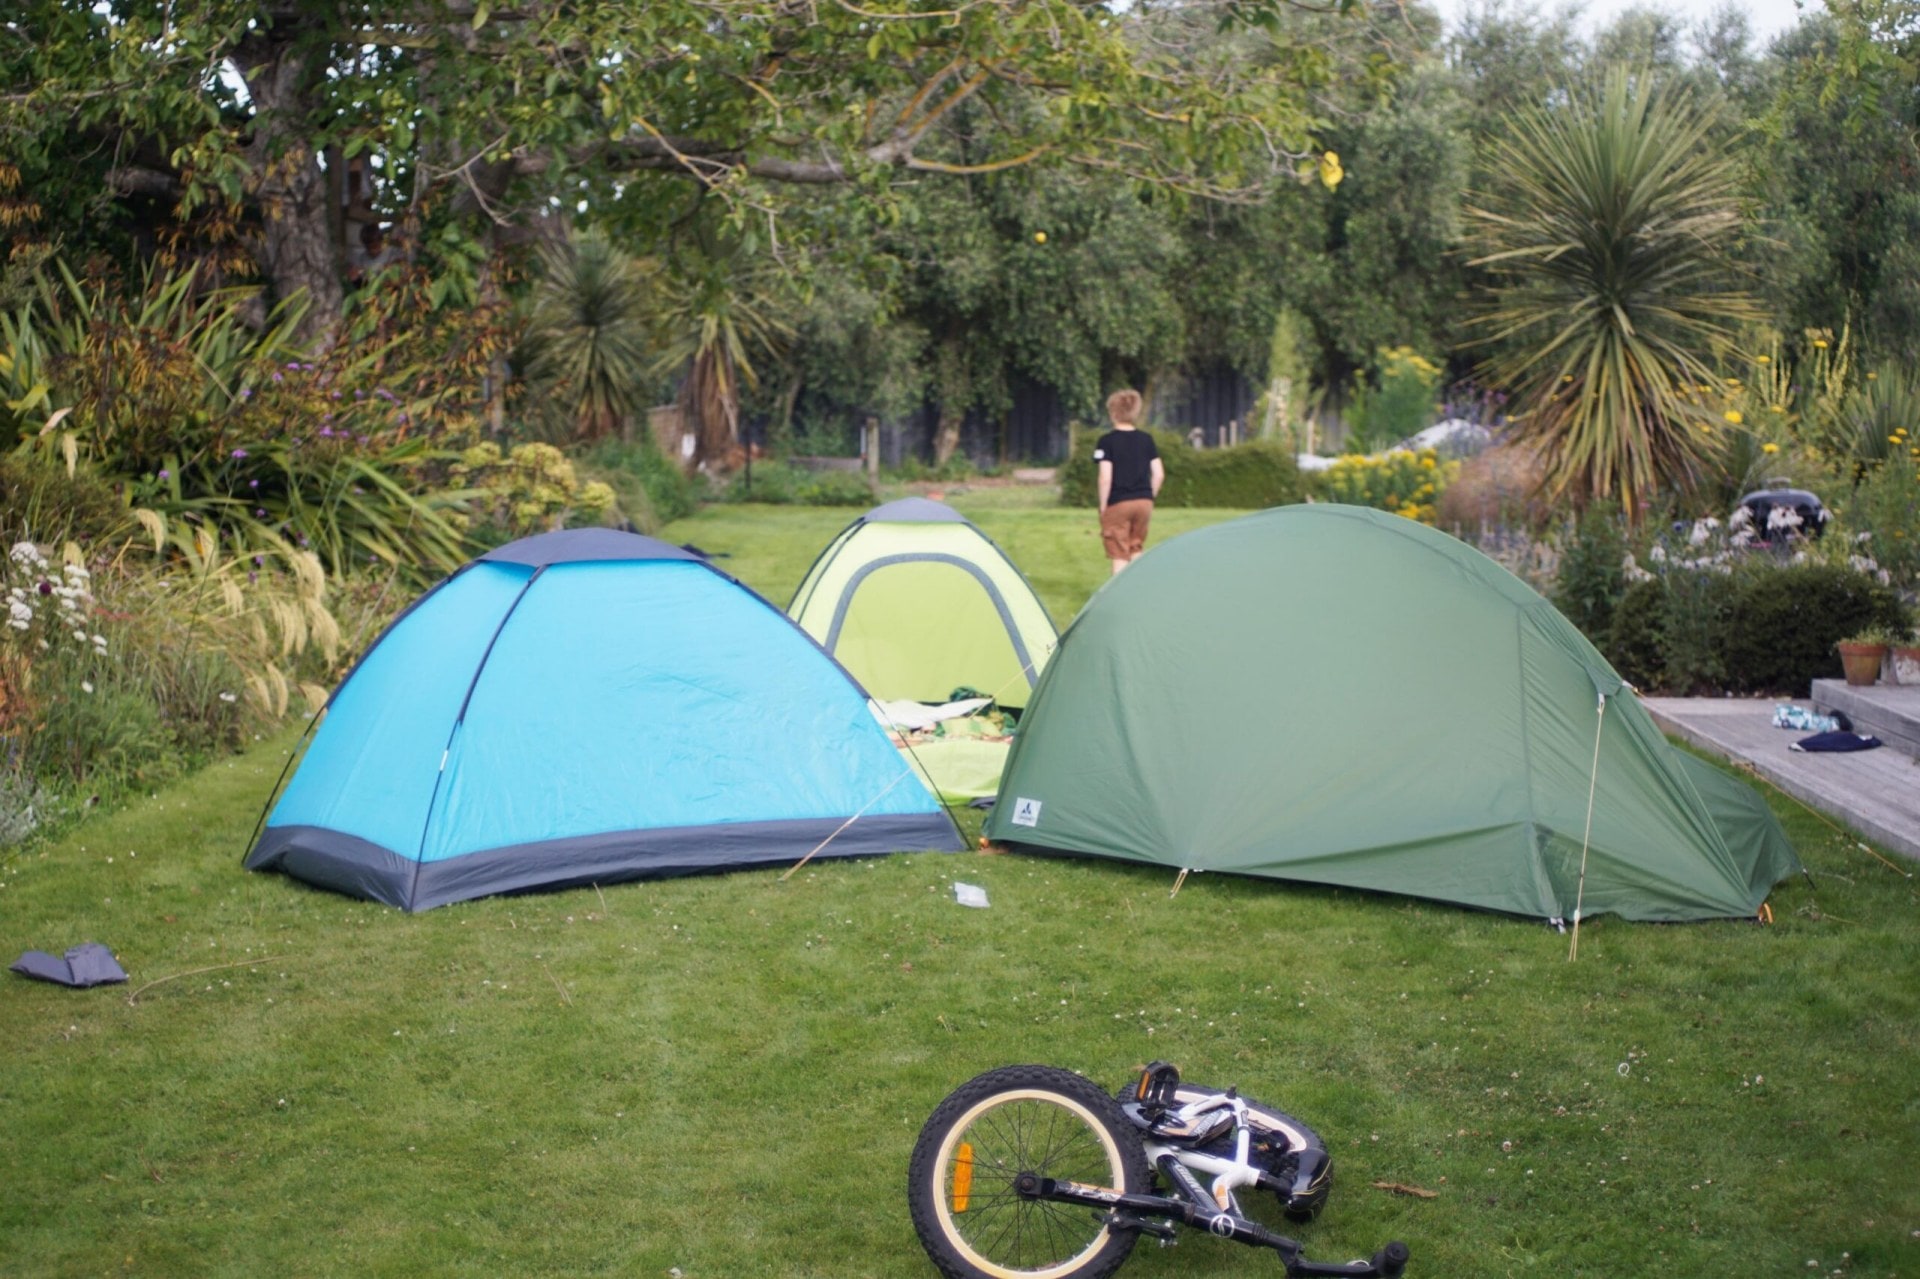 Three tents pitched on a lawn.